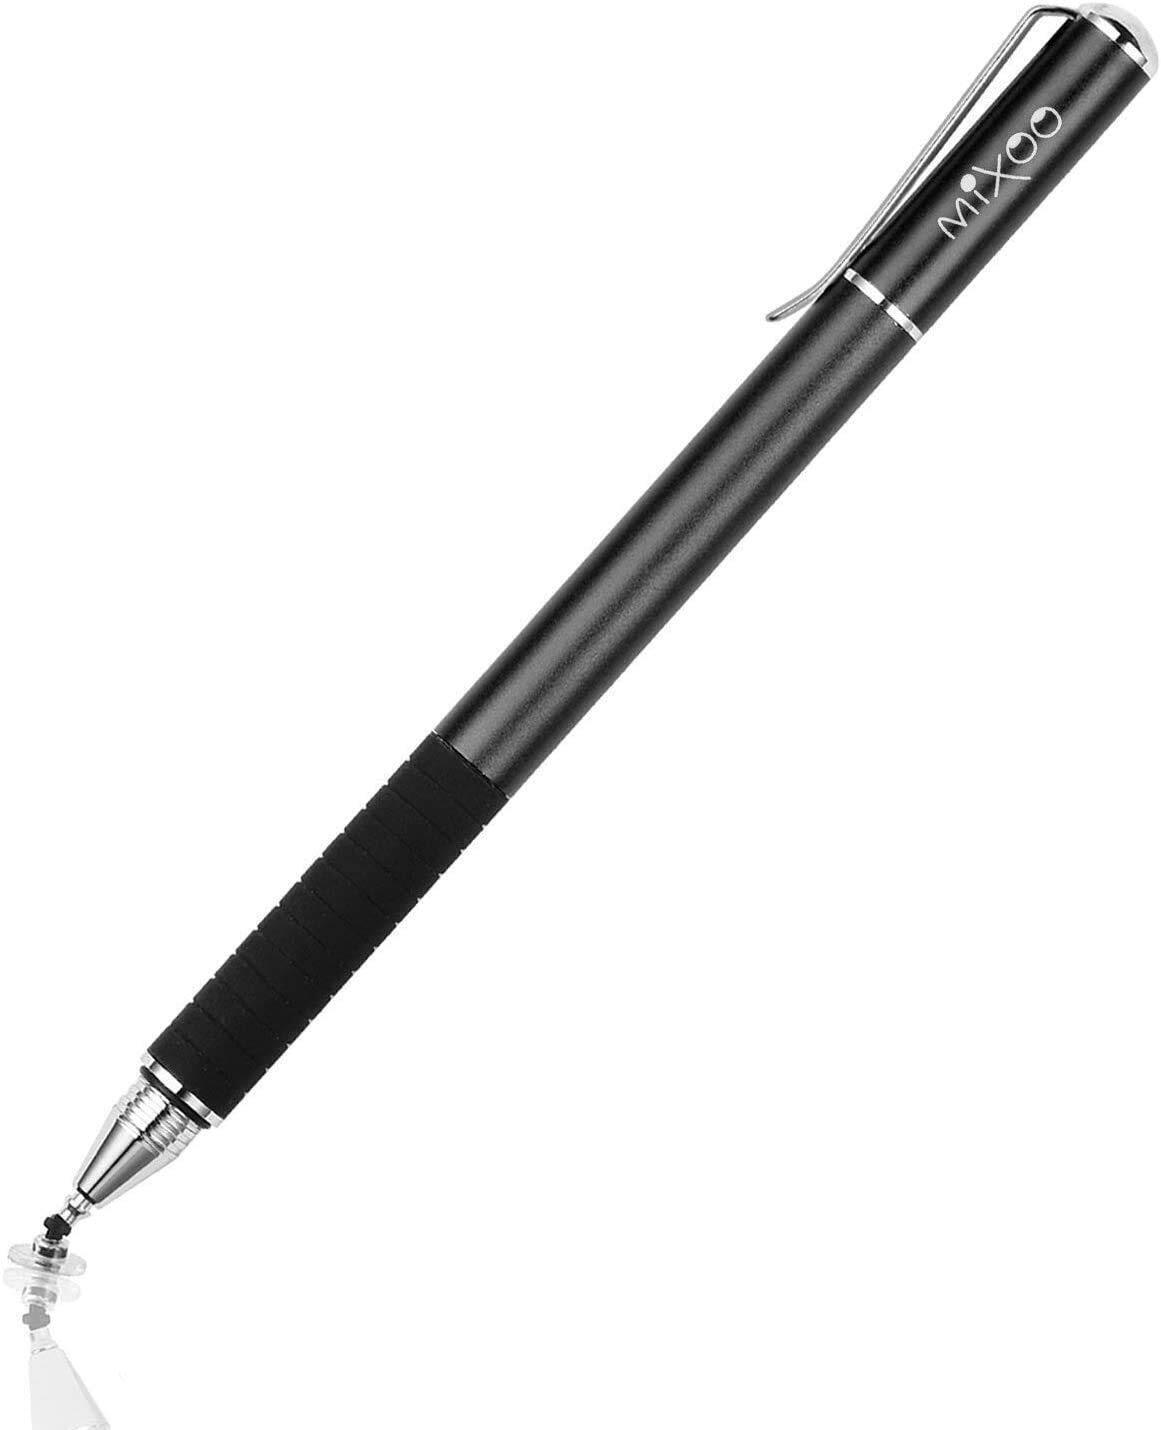 Mixoo Capacitive Stylus PenDisc and Fiber Tip 2-in-1 Series High Sensitivity ...